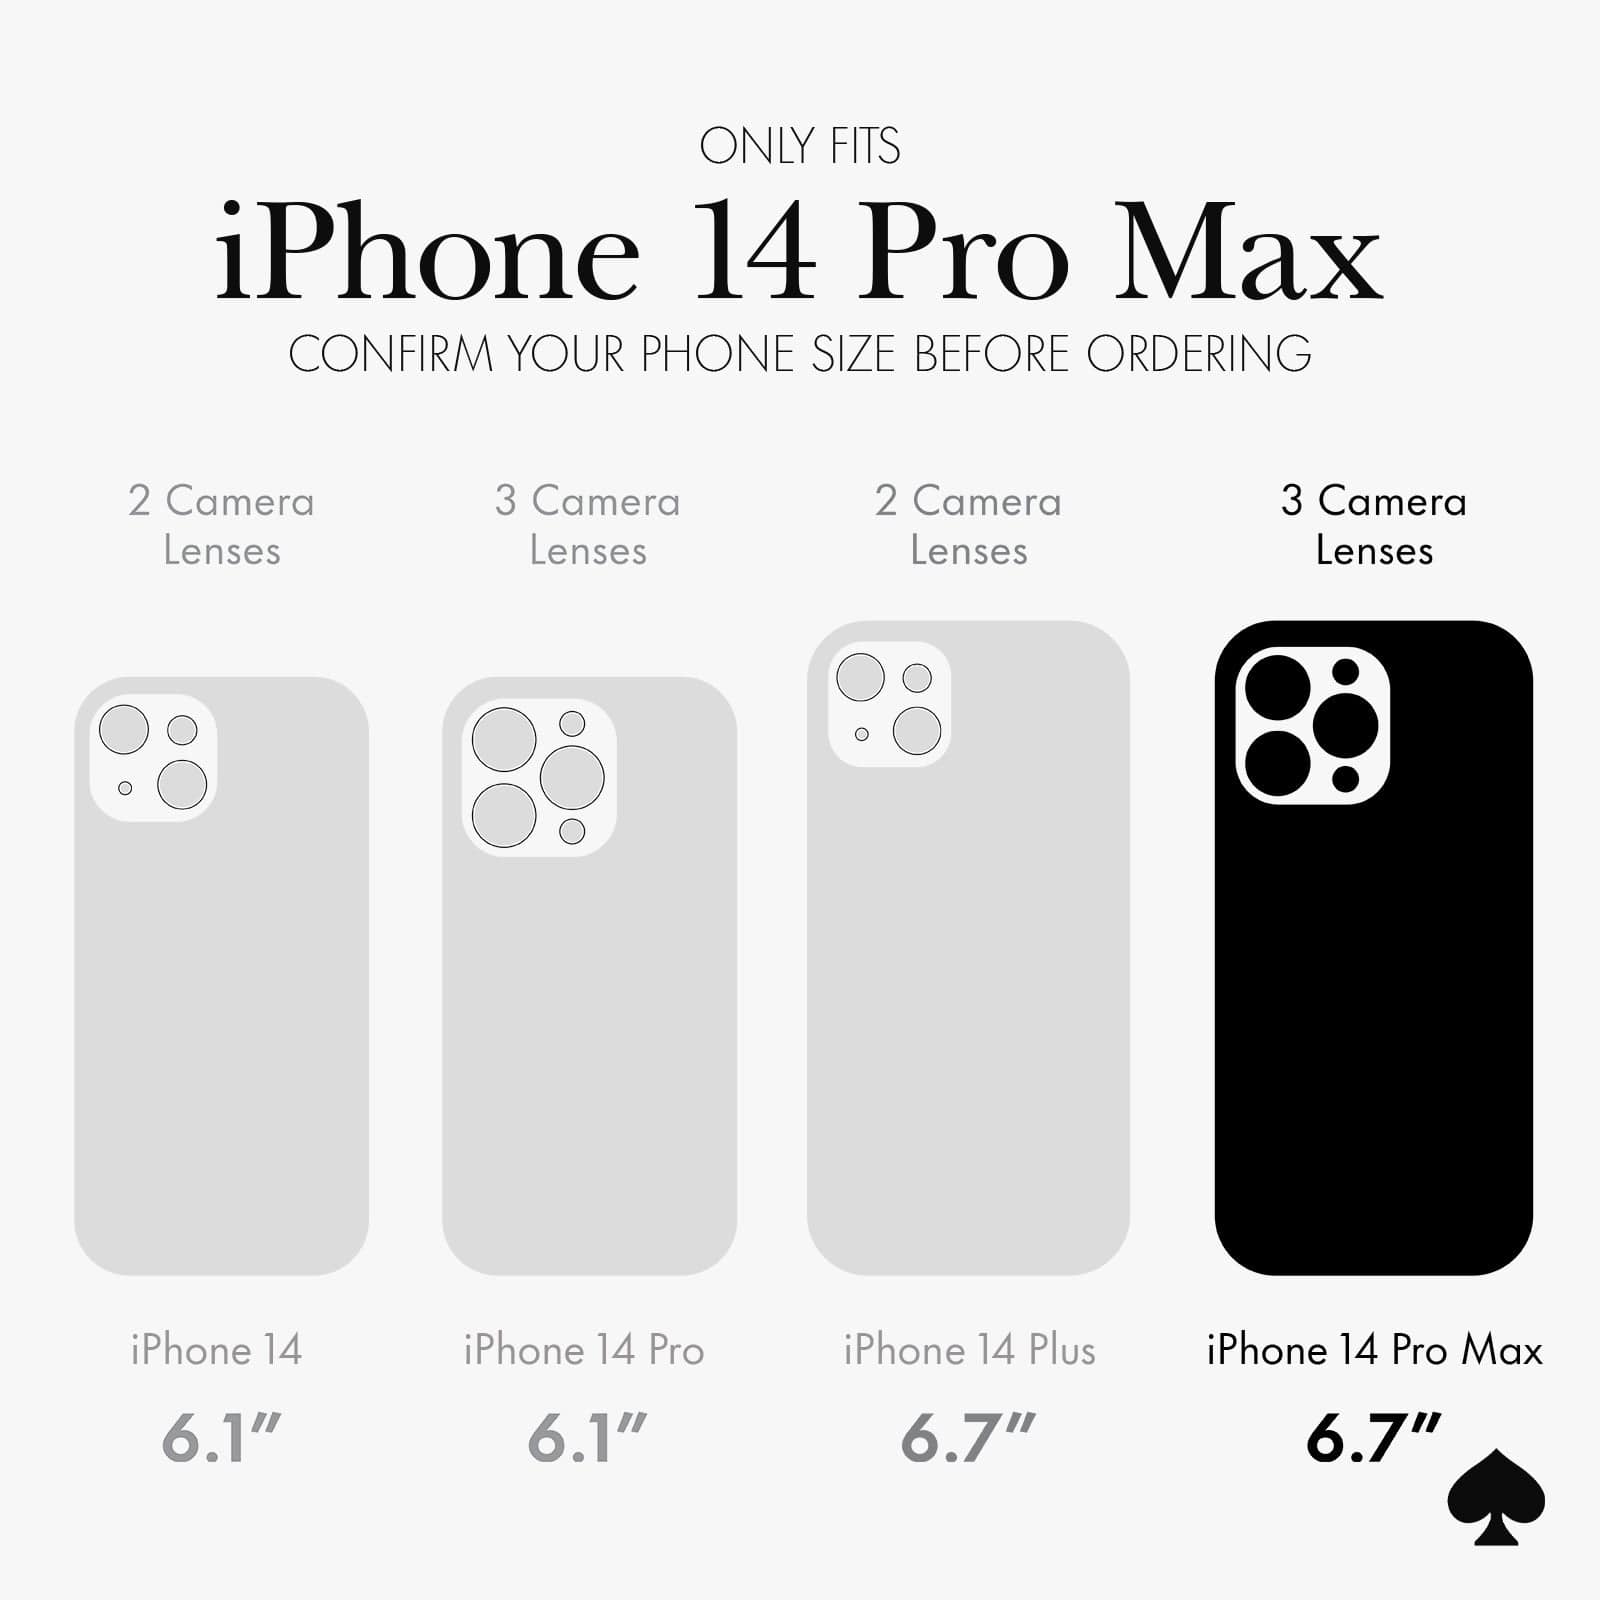 ONLY fits iphone 14 pro max. please confrim your device size